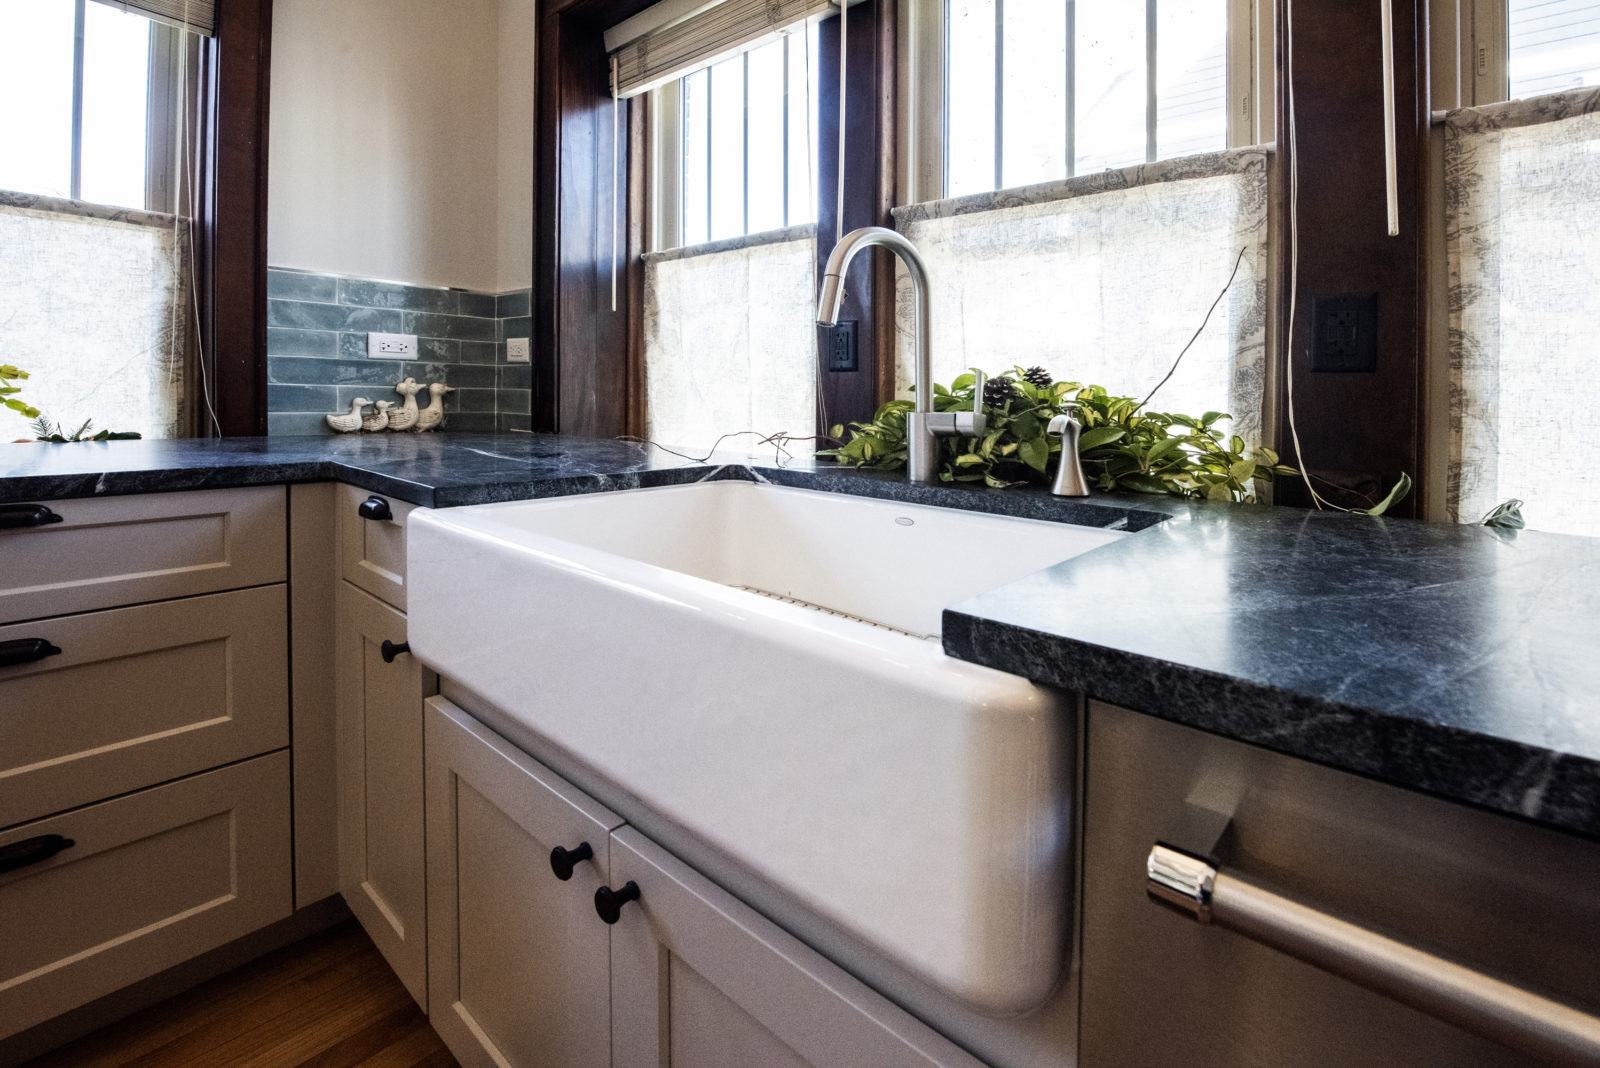 Close-up of tub-style white sink, black granite countertops in a kitchen